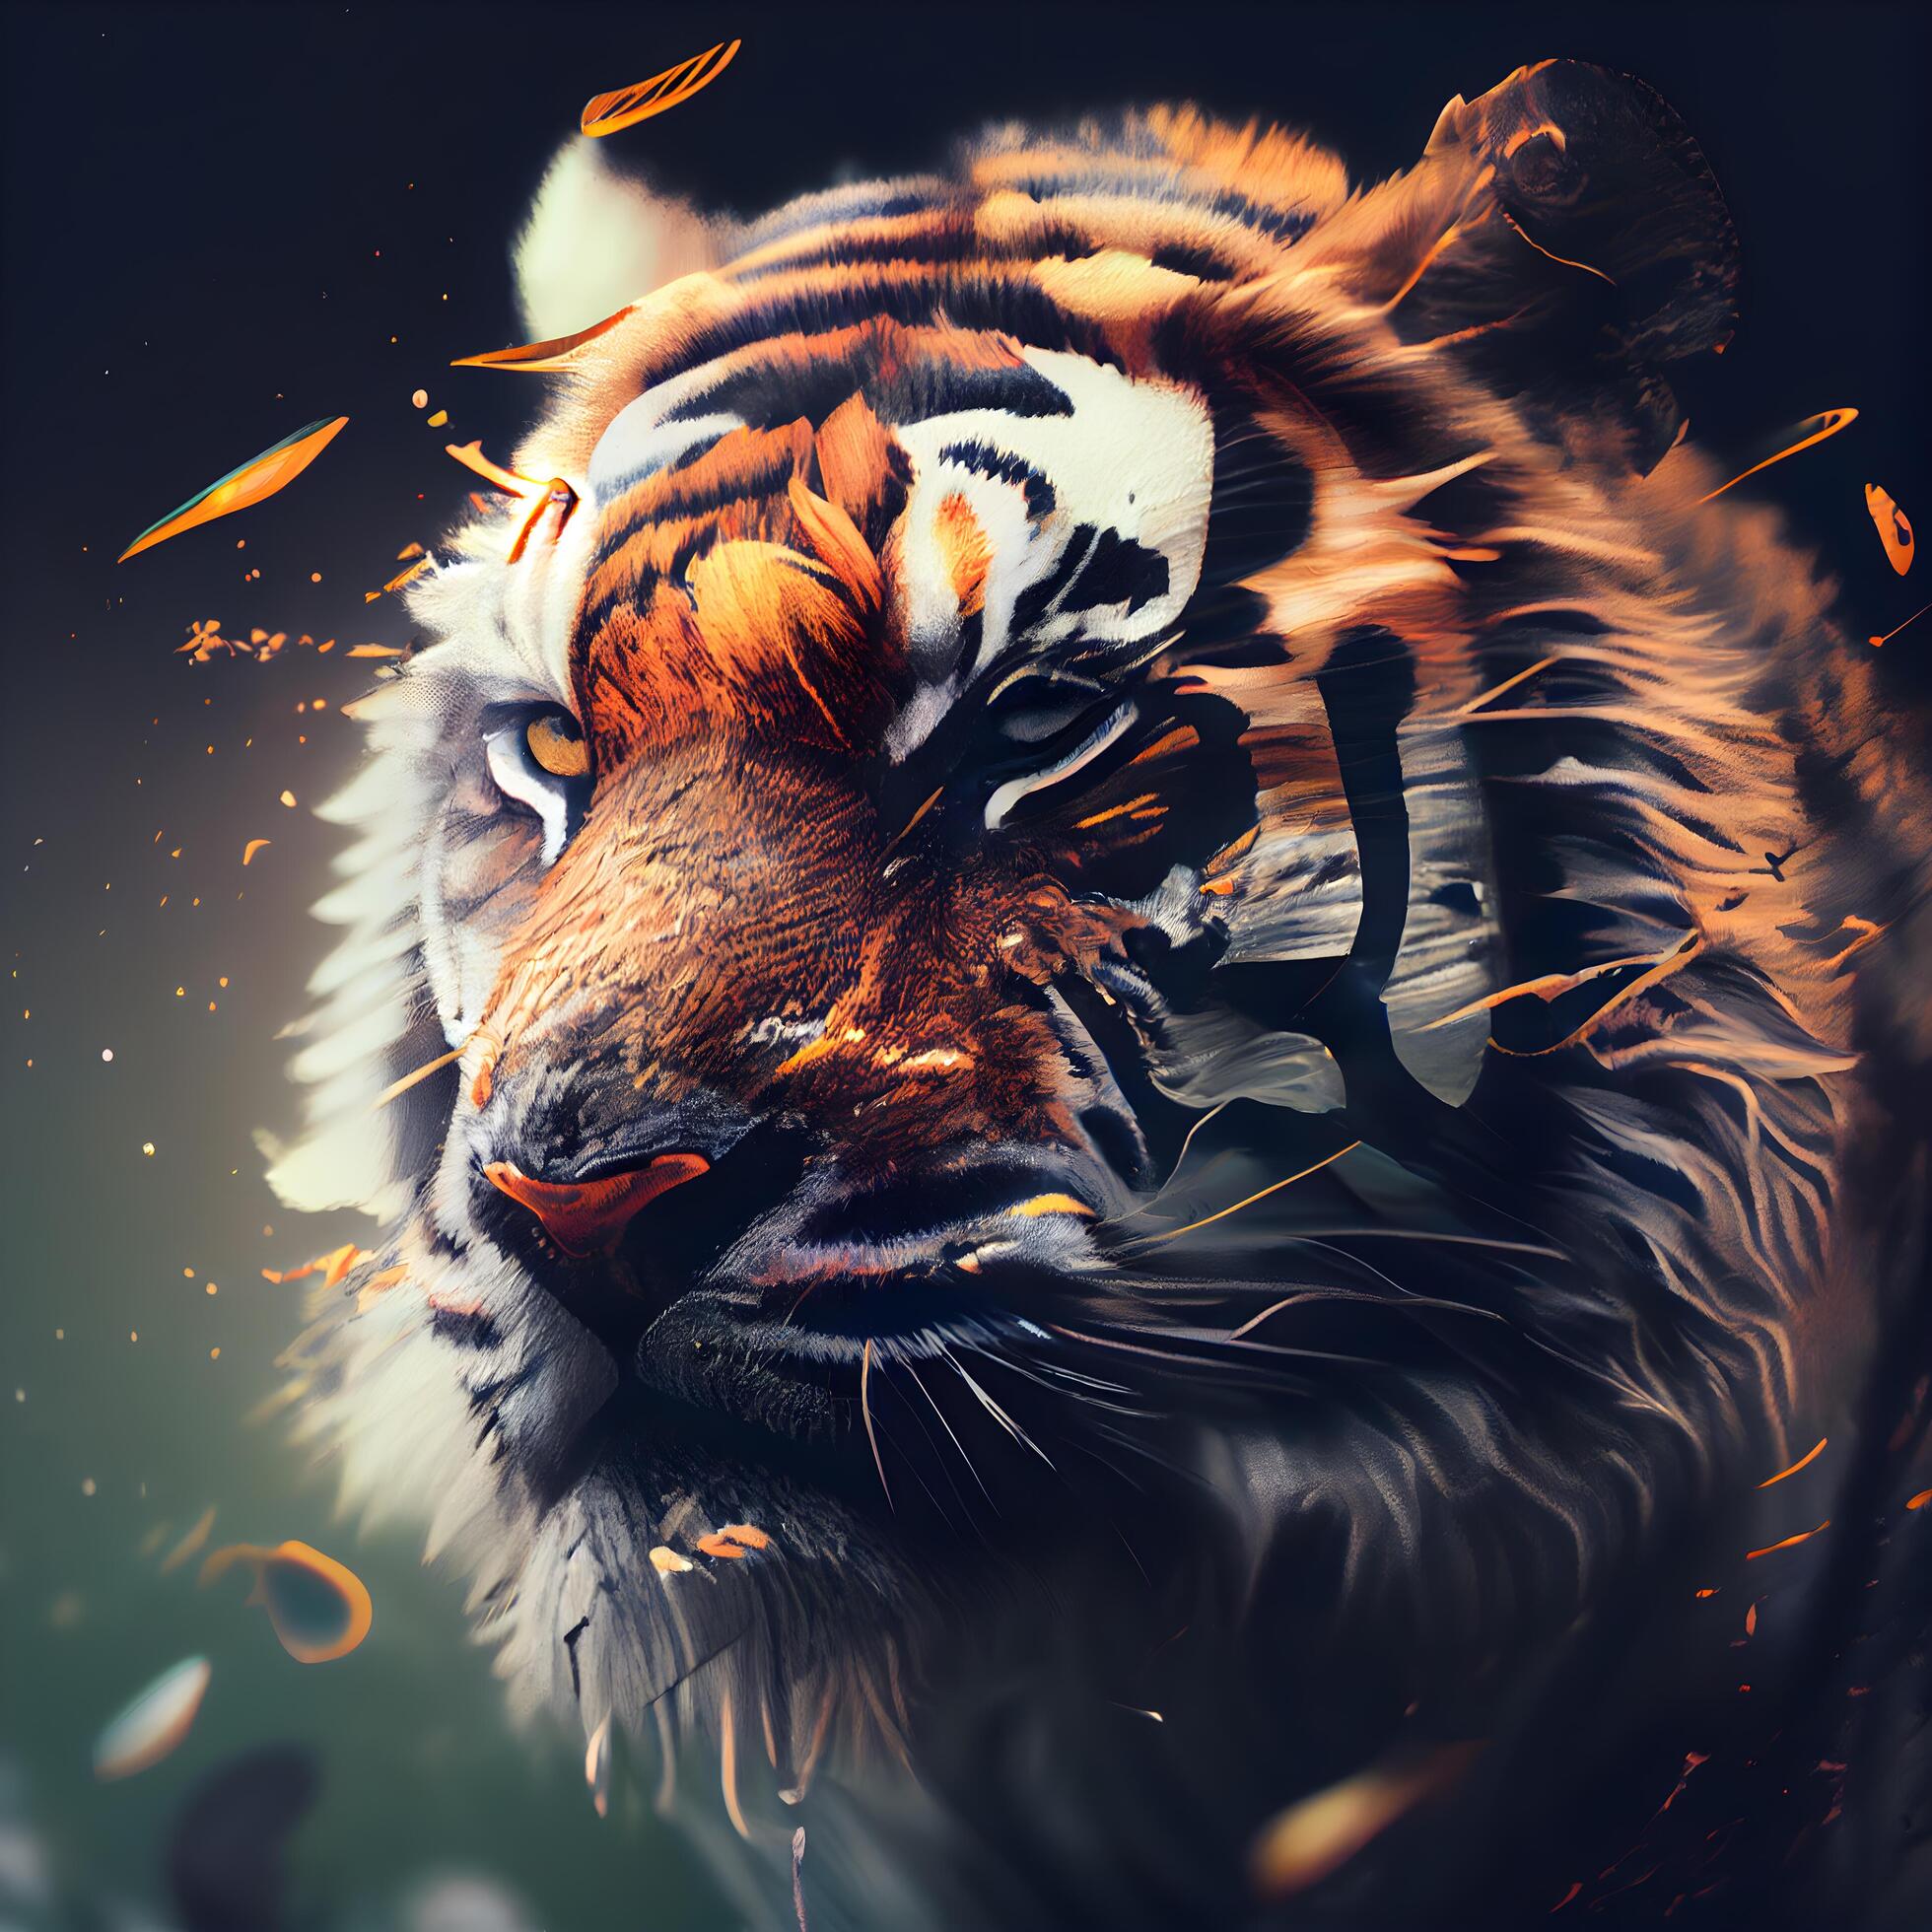 Scary Tiger Dark Fantasy Wall Mural | Buy online at Europosters